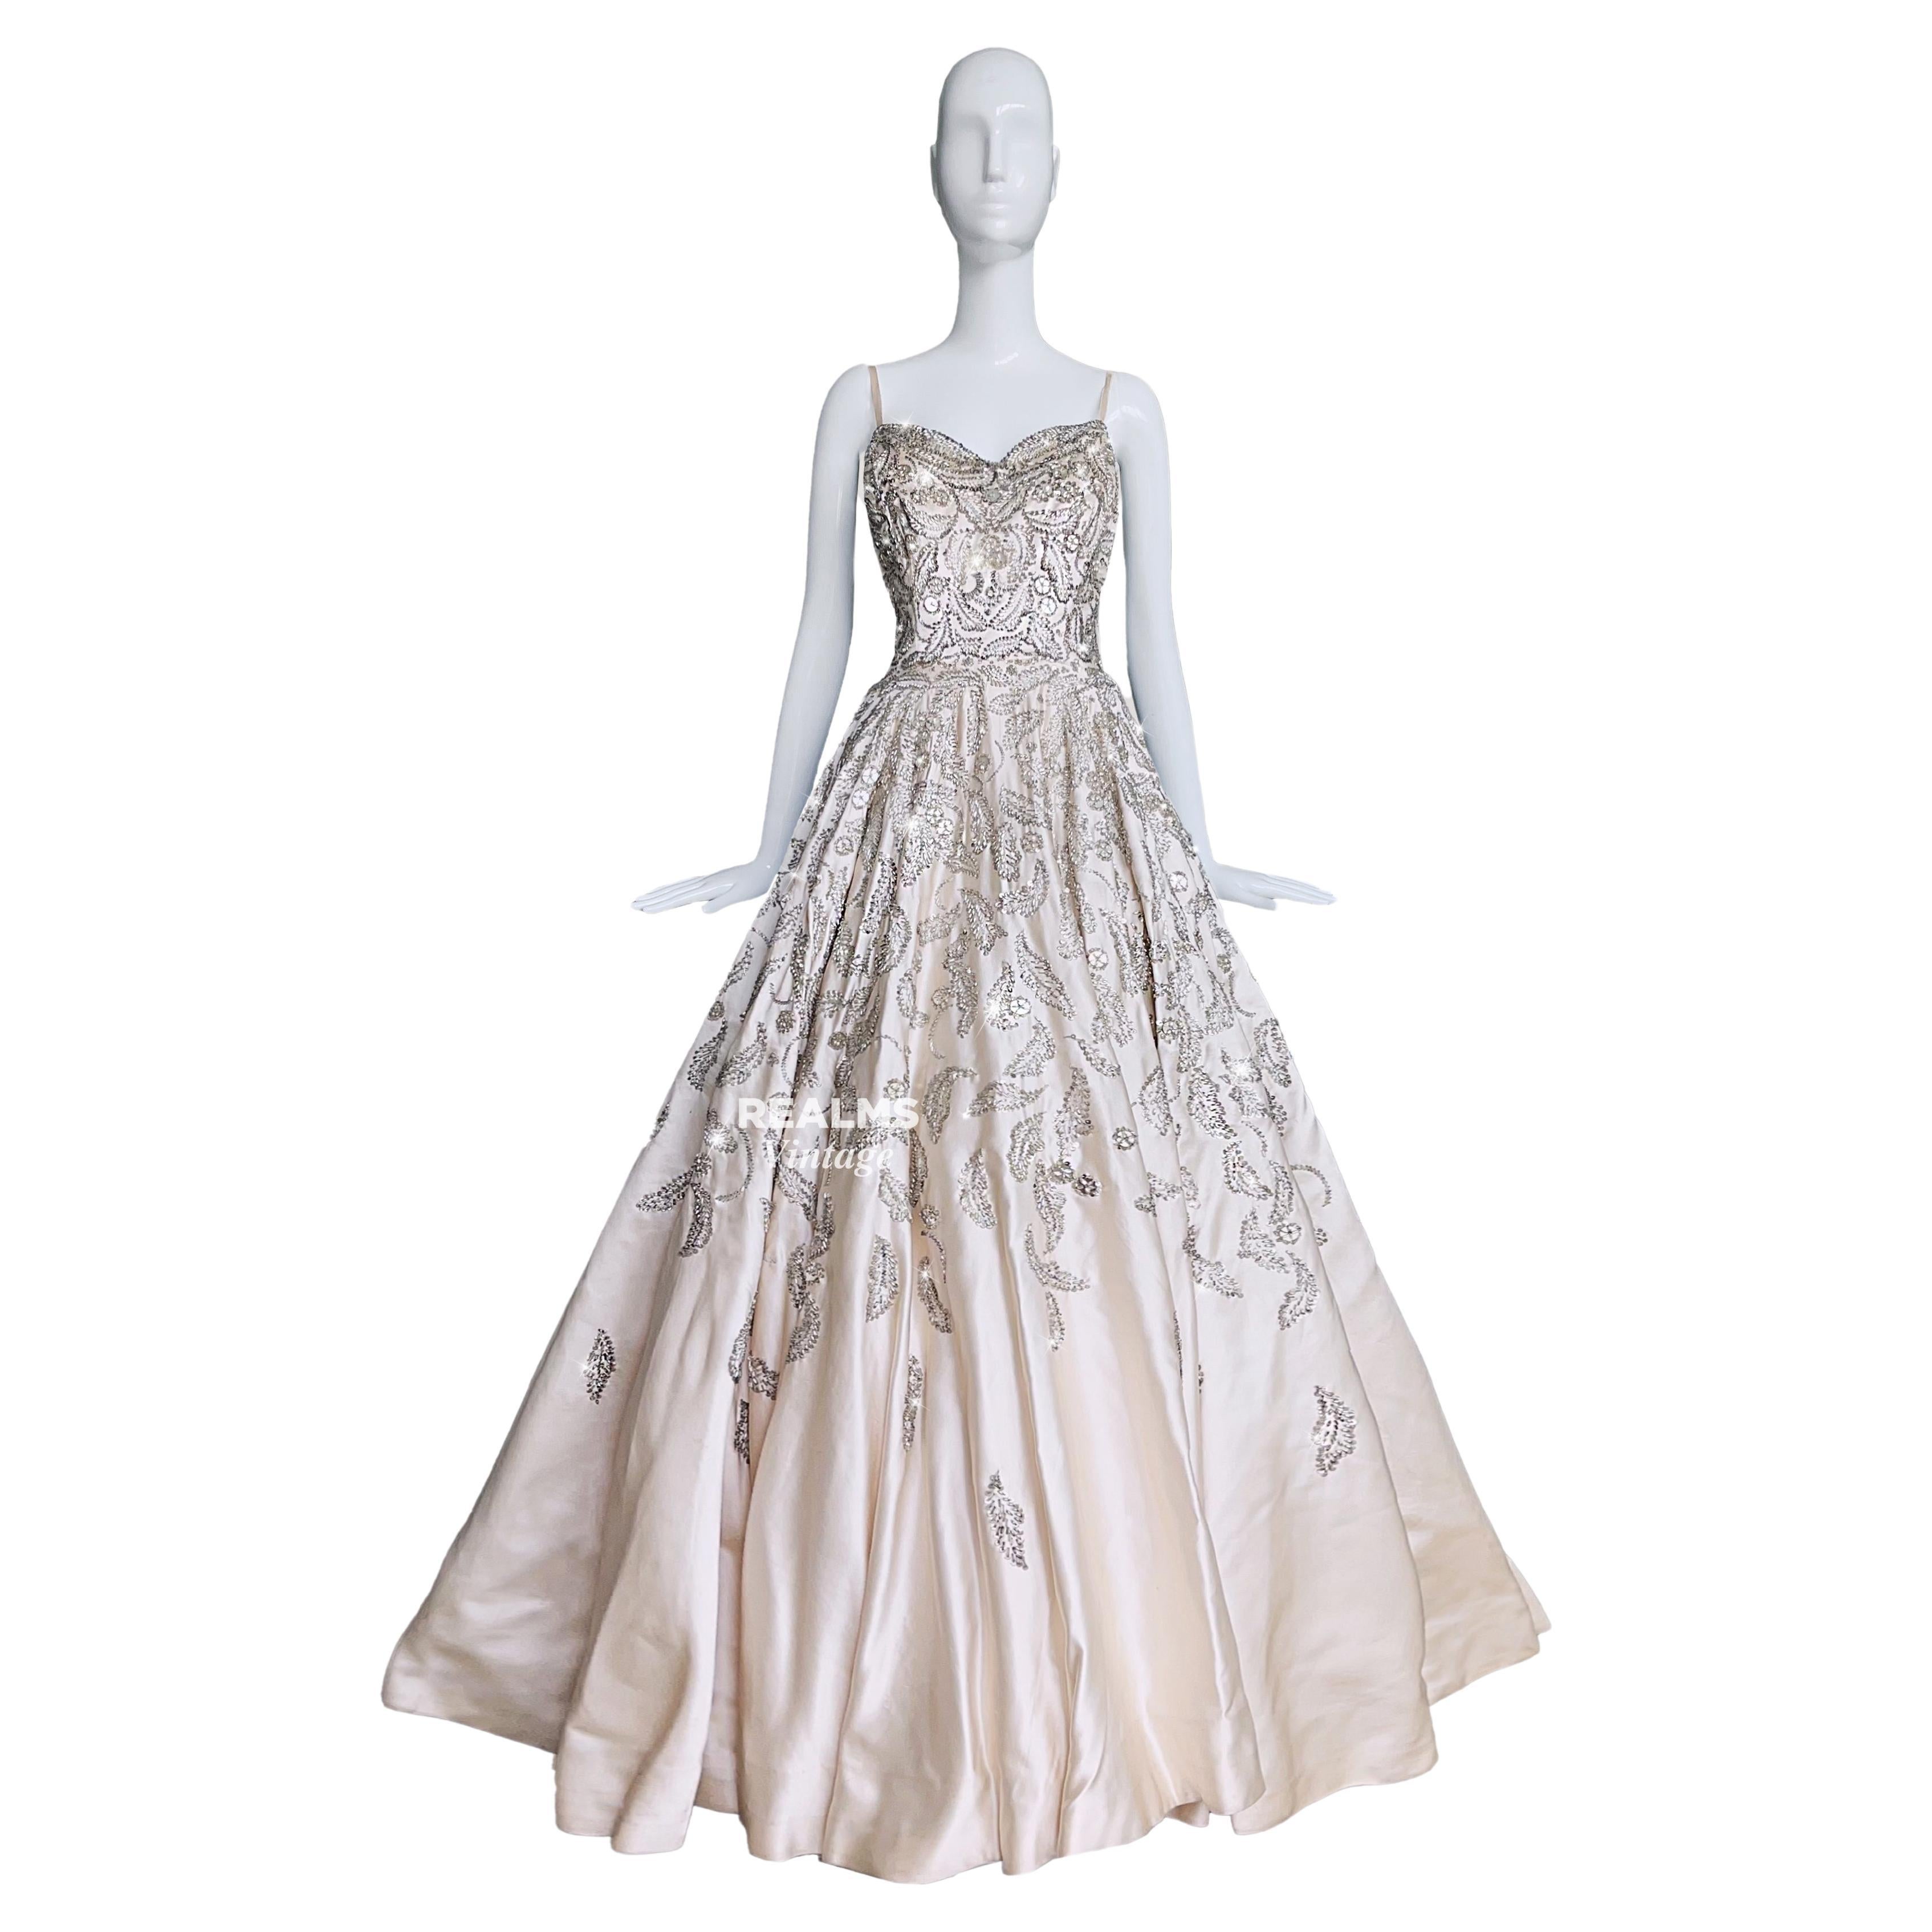 Pierre Balmain Couture Ballgown  1955 Iconic Dress For Sale